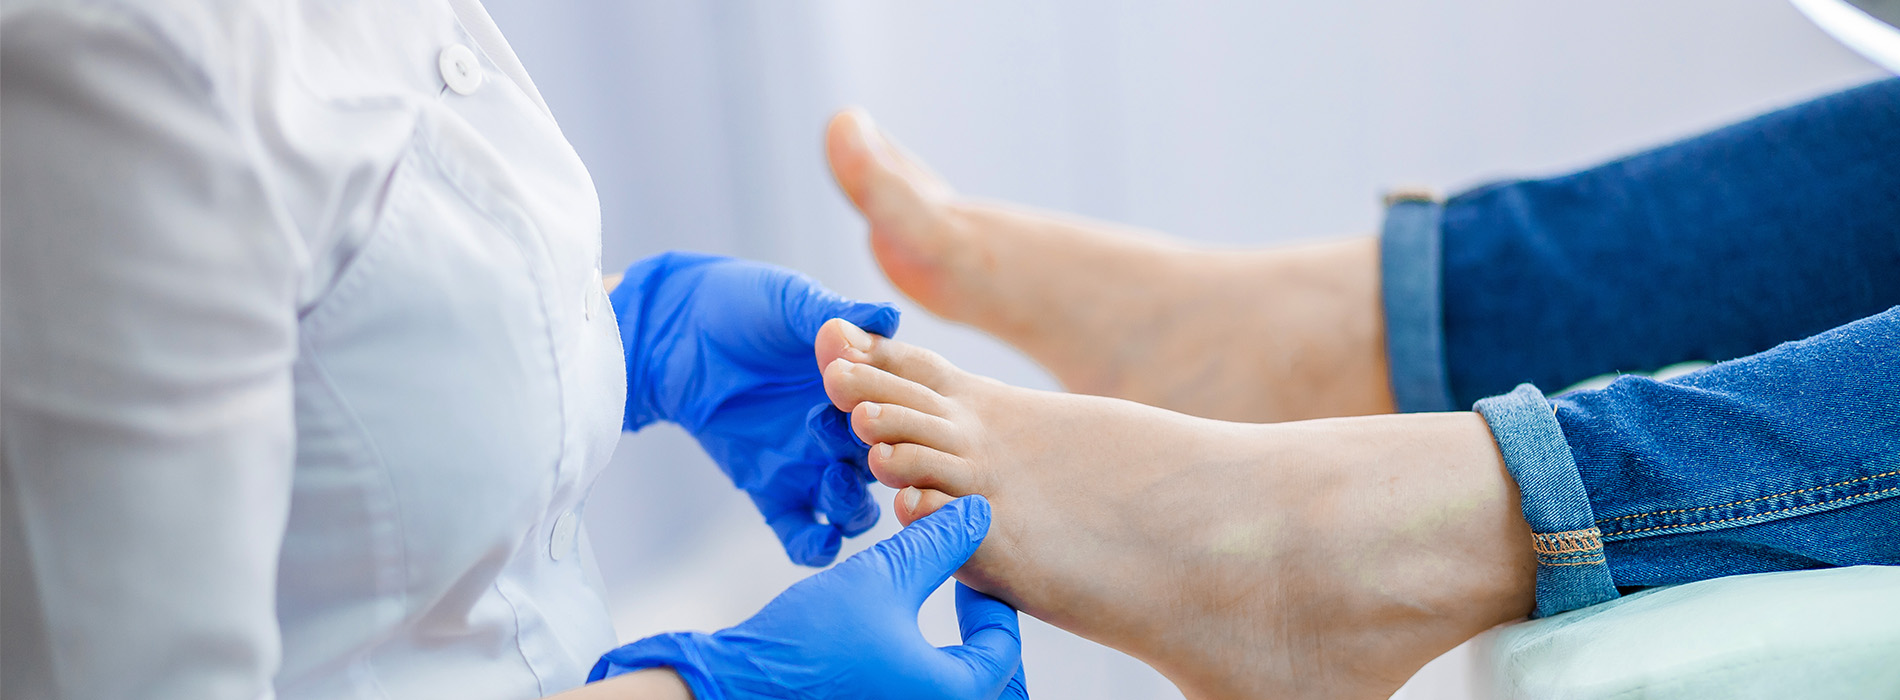 A healthcare professional wearing gloves and a white coat attends to a patient s foot, with the focus on the medical treatment being administered.